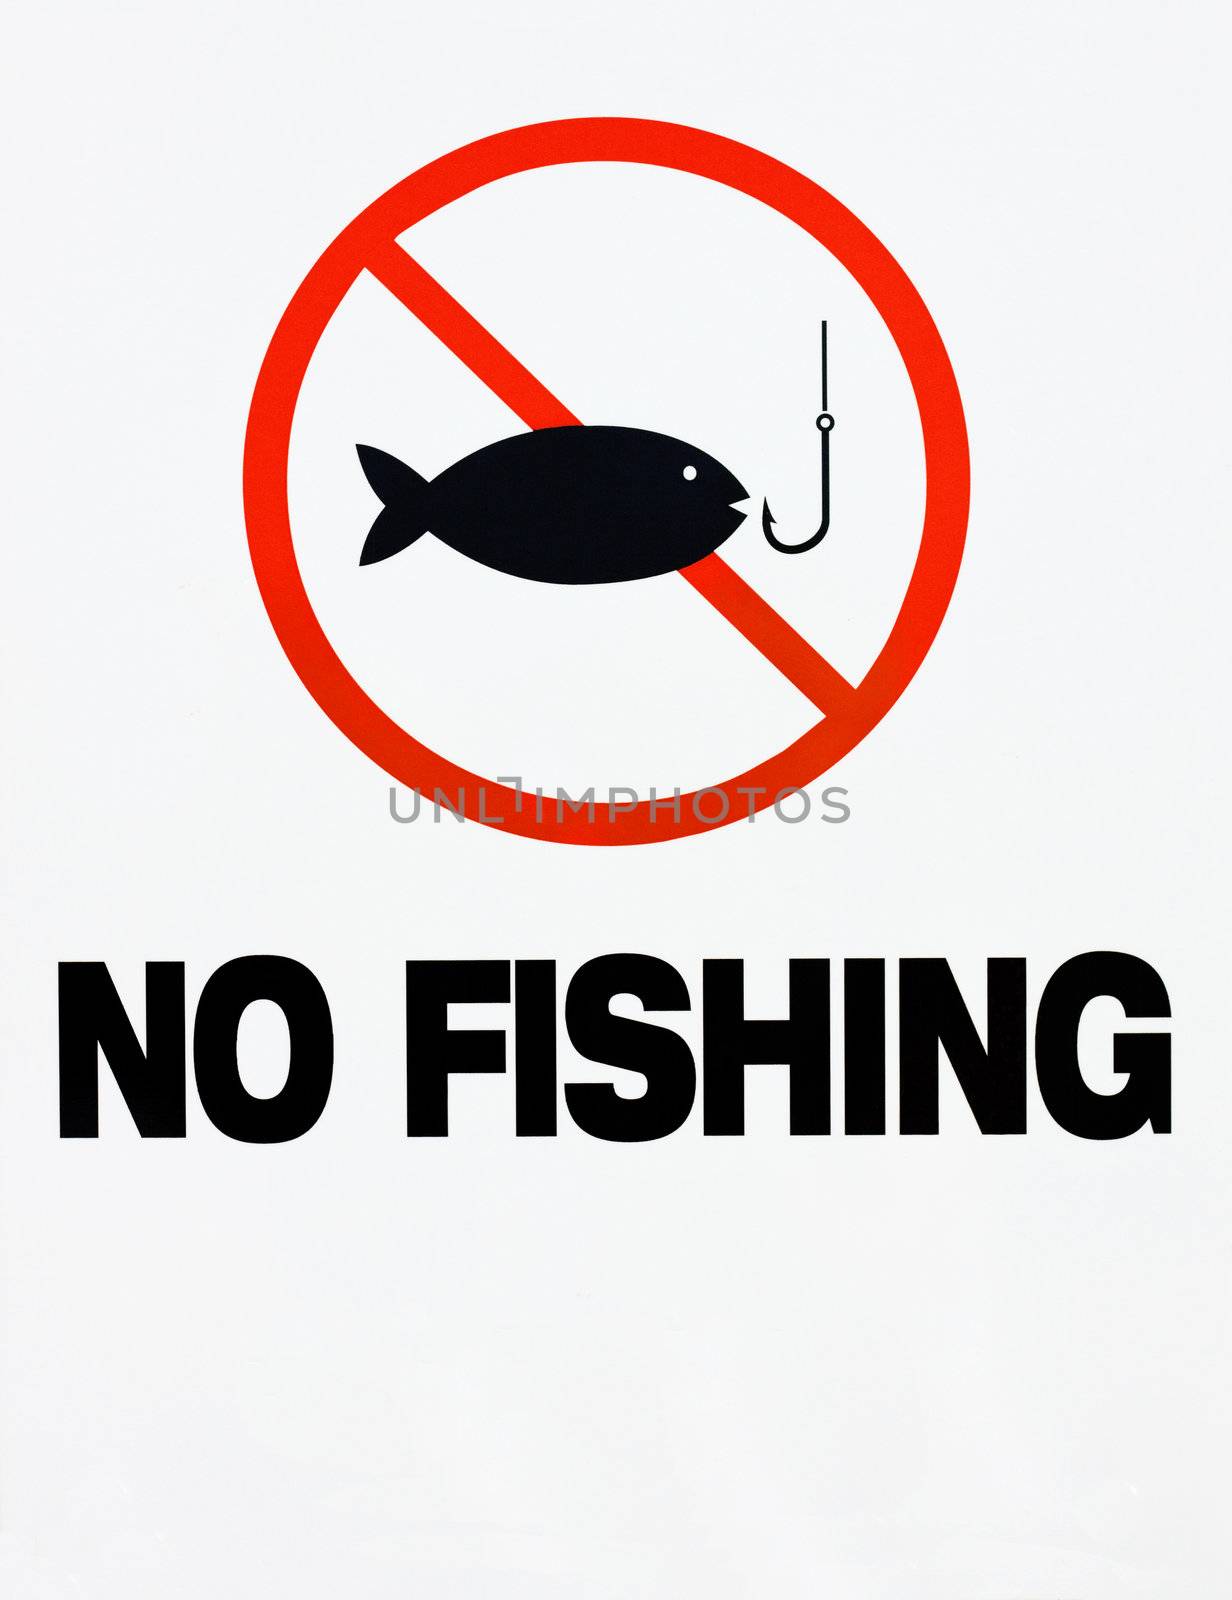 A red, black and white no fishing sign with fish and hook illustration